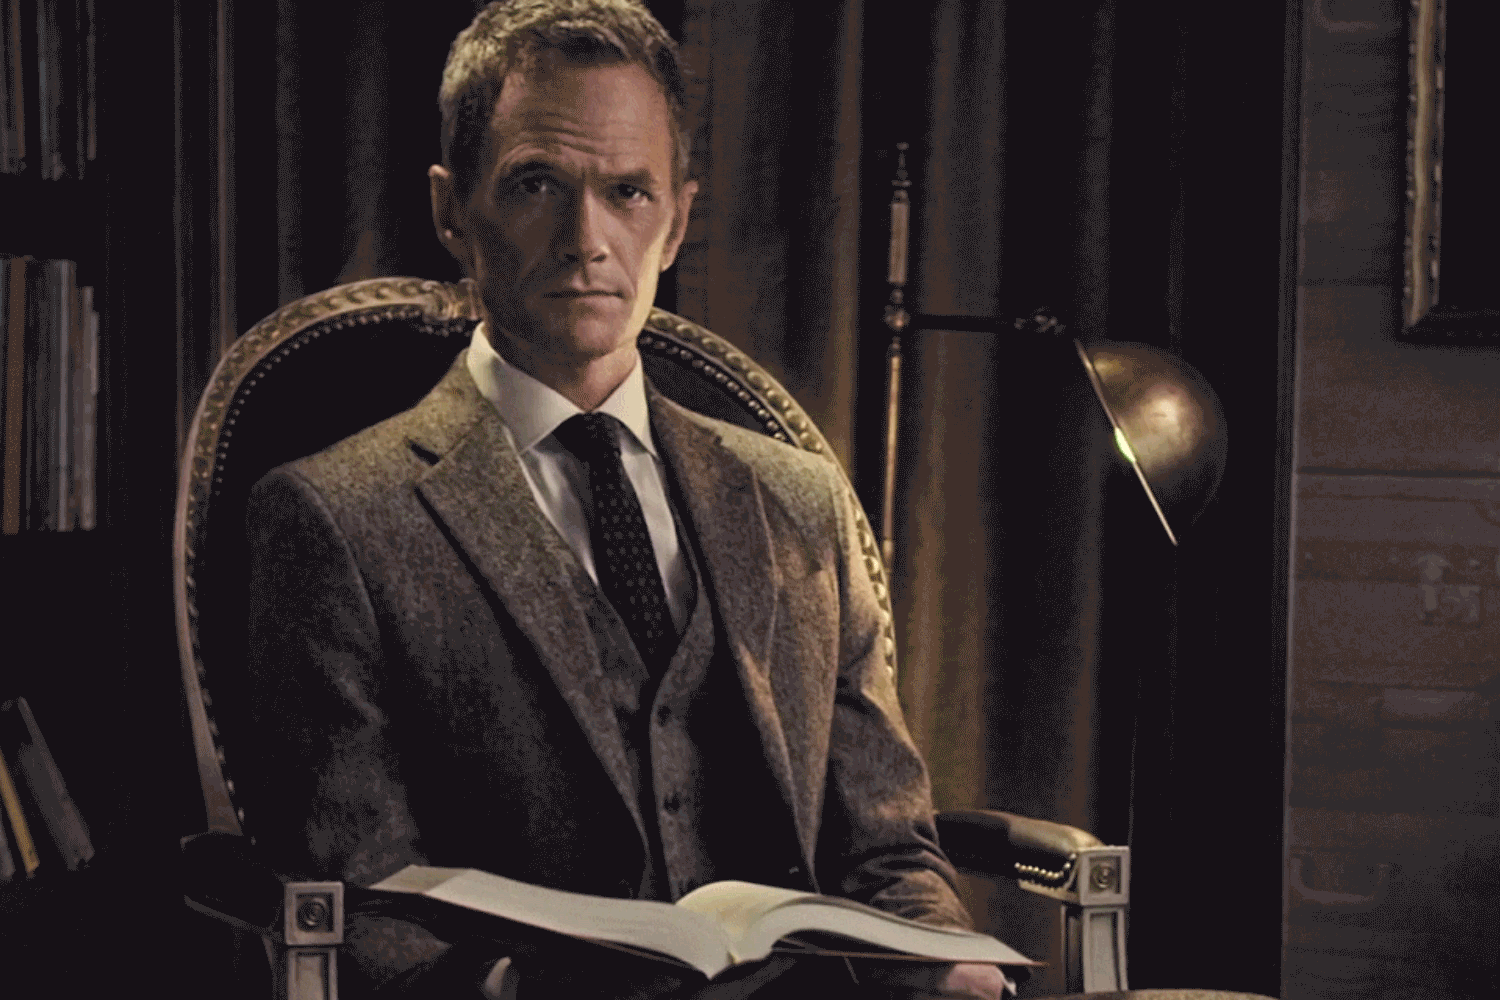 NPH sitting in a chair with book